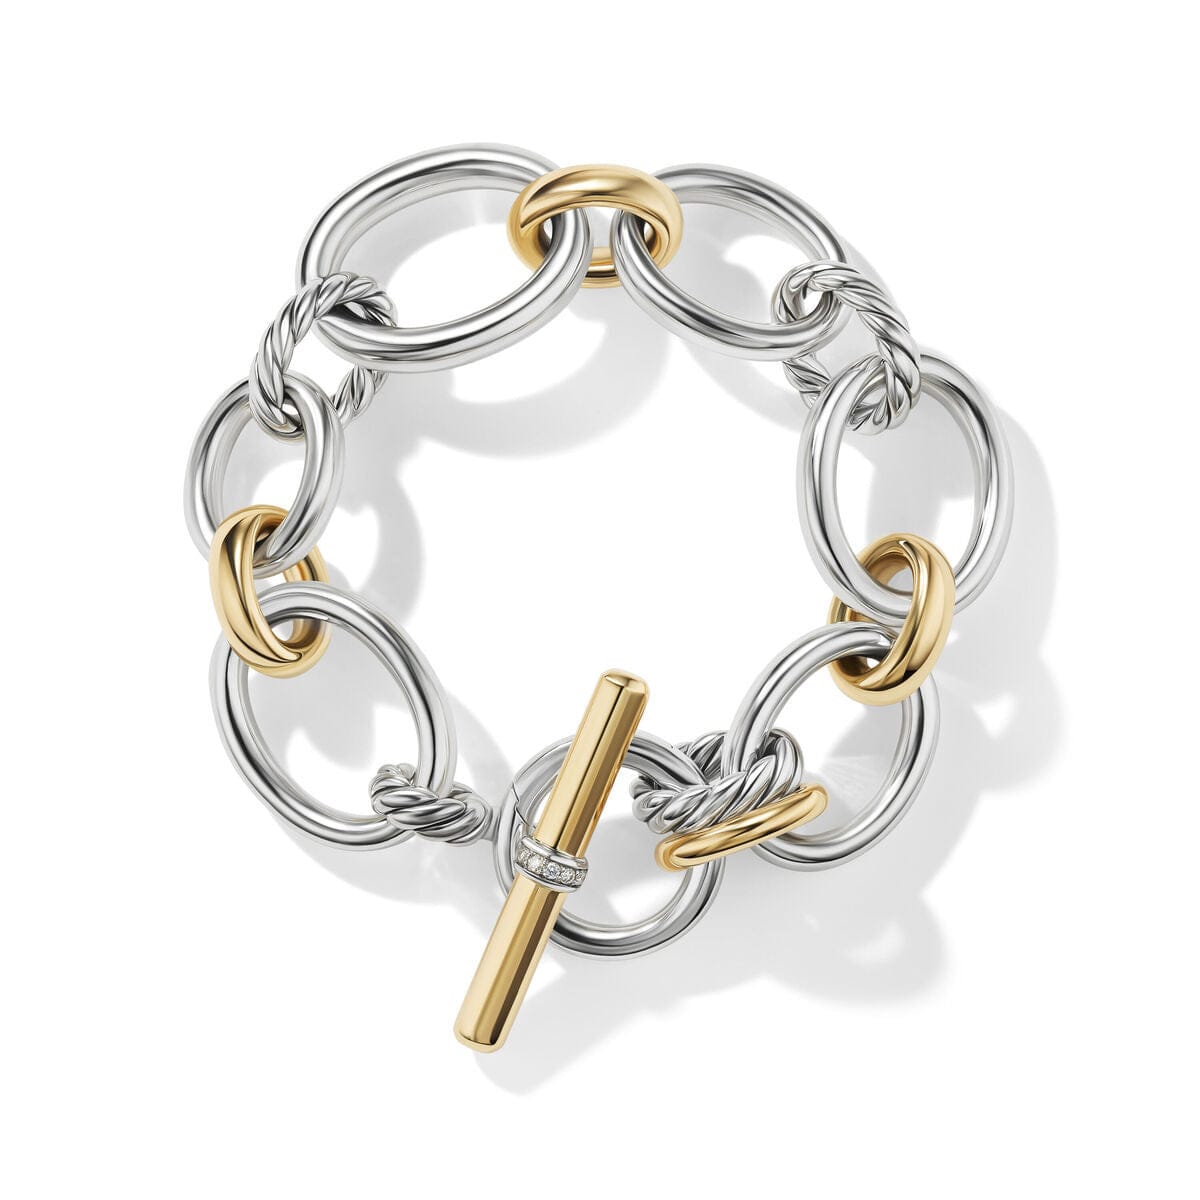 DY Mercer™ Bracelet in Sterling Silver with 18K Yellow Gold and Pavé Diamonds